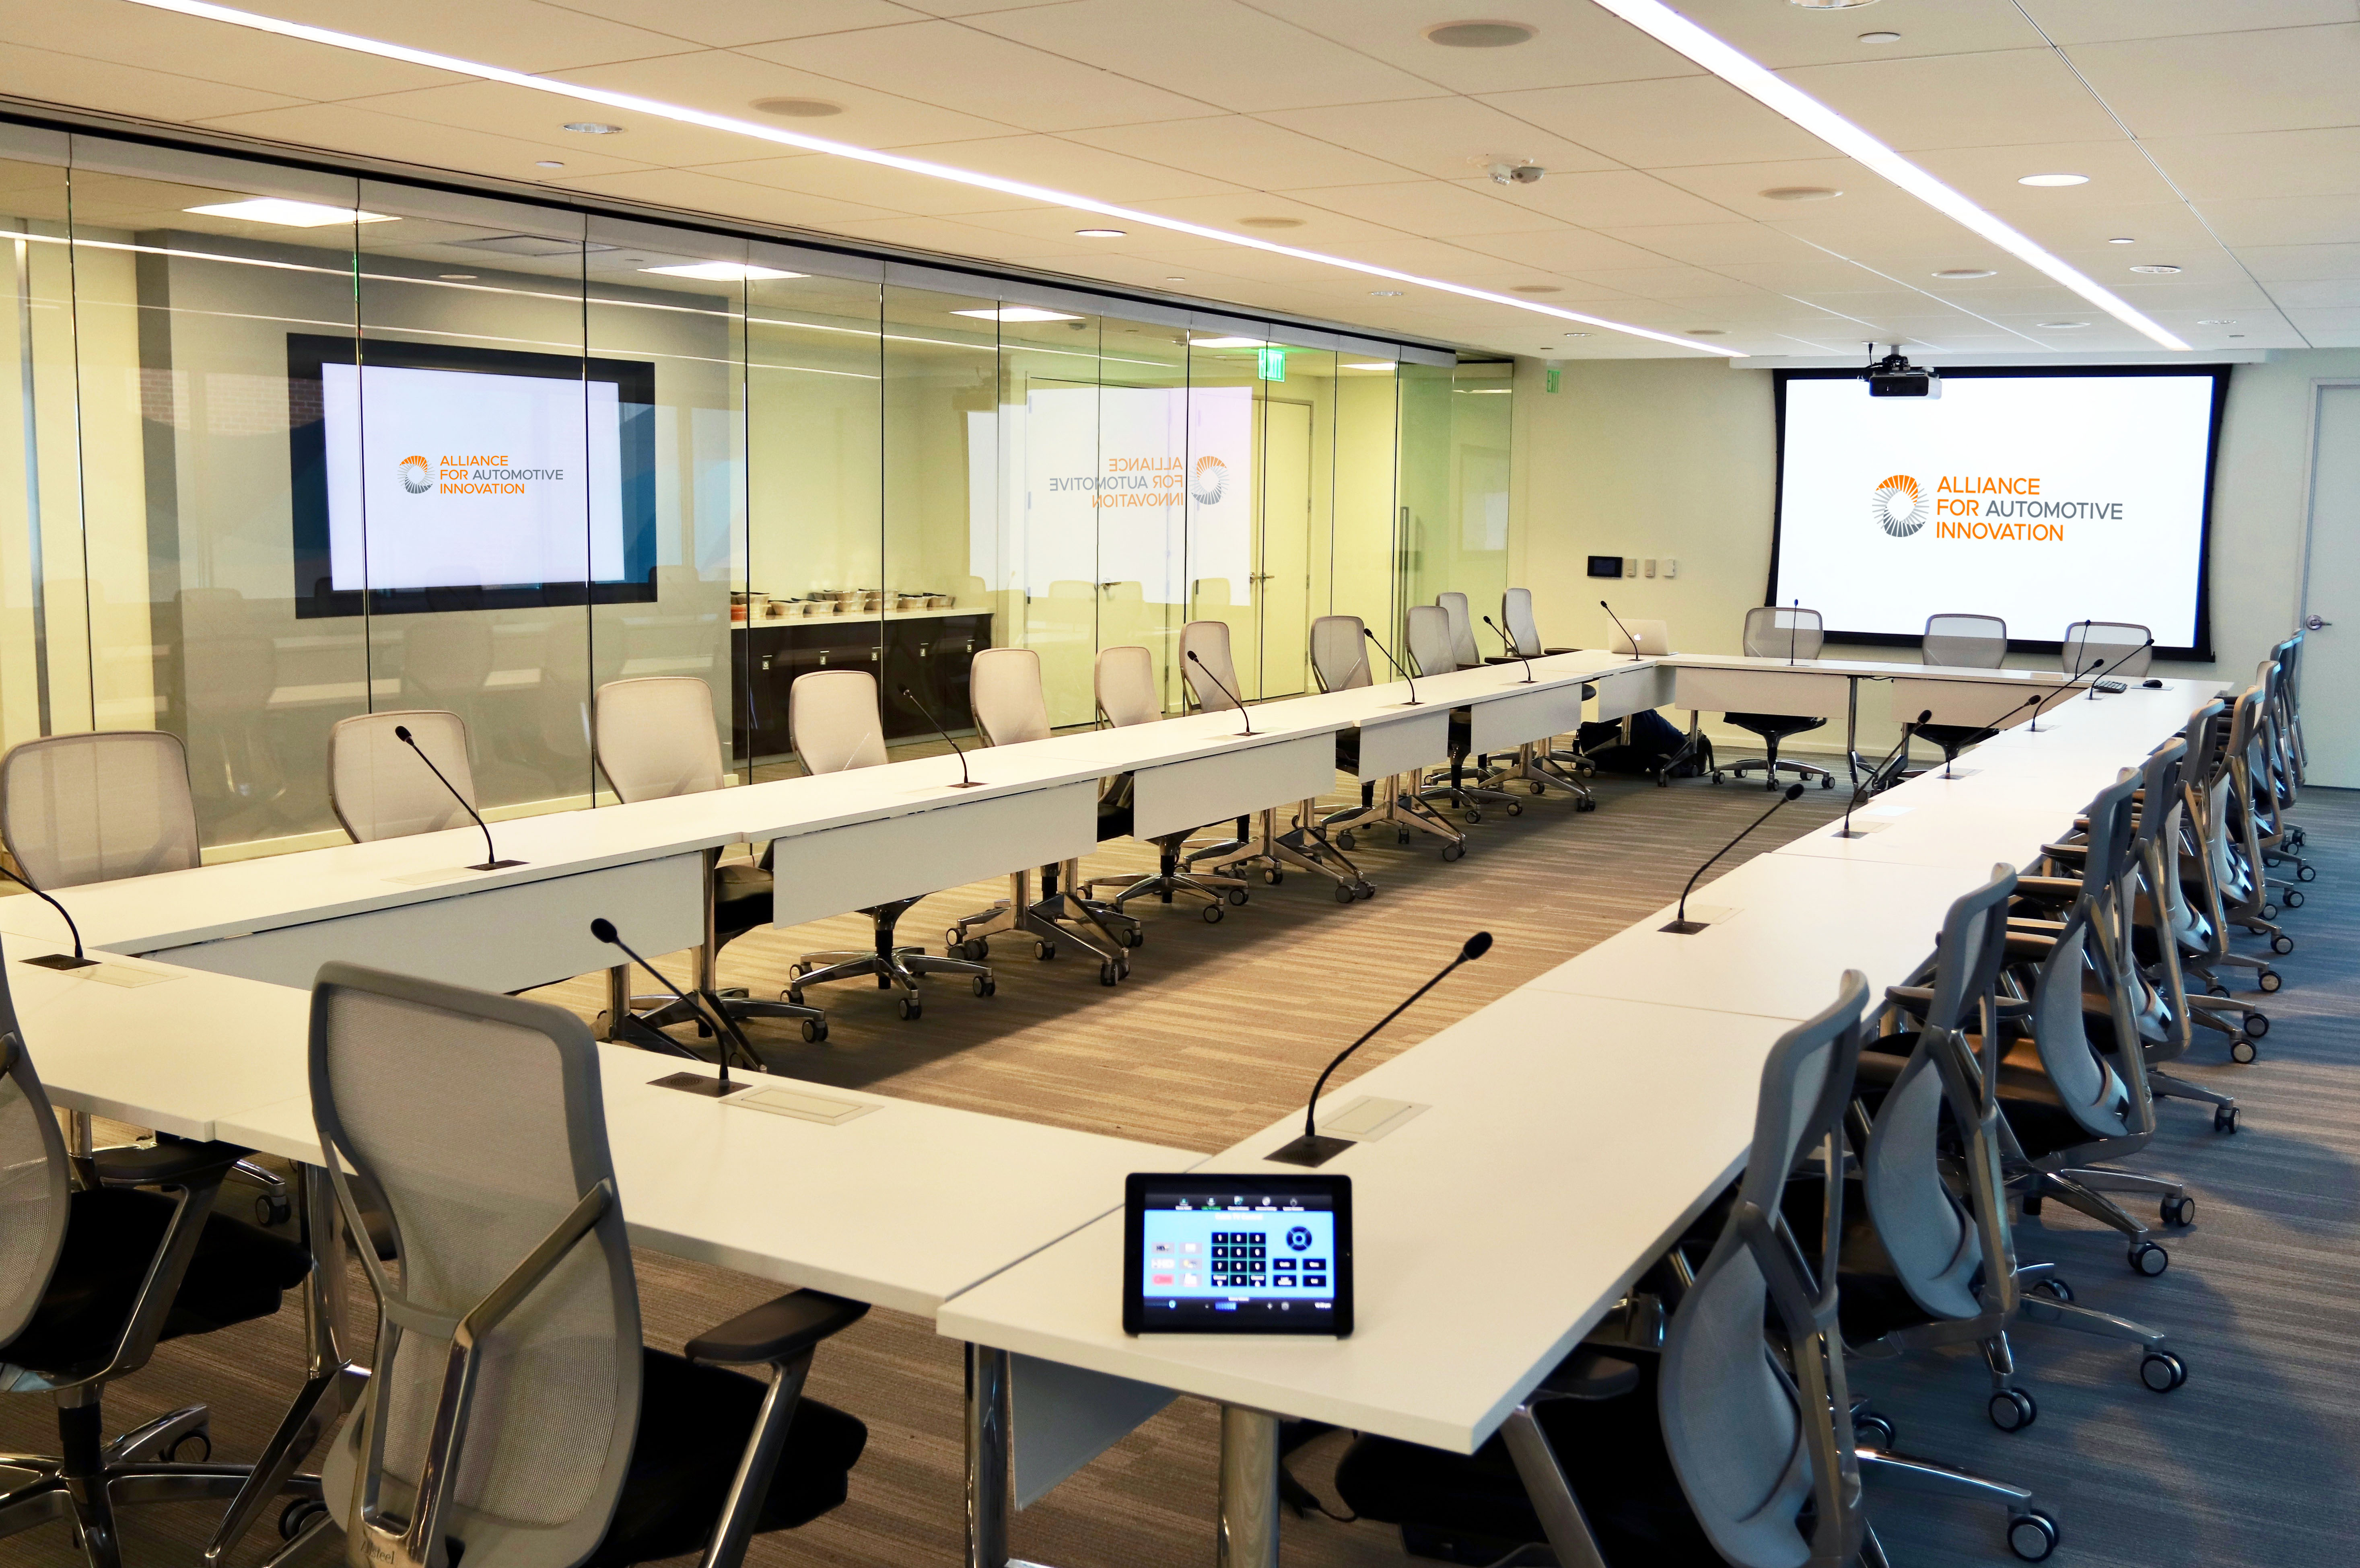 Inside the Glass Conference Room